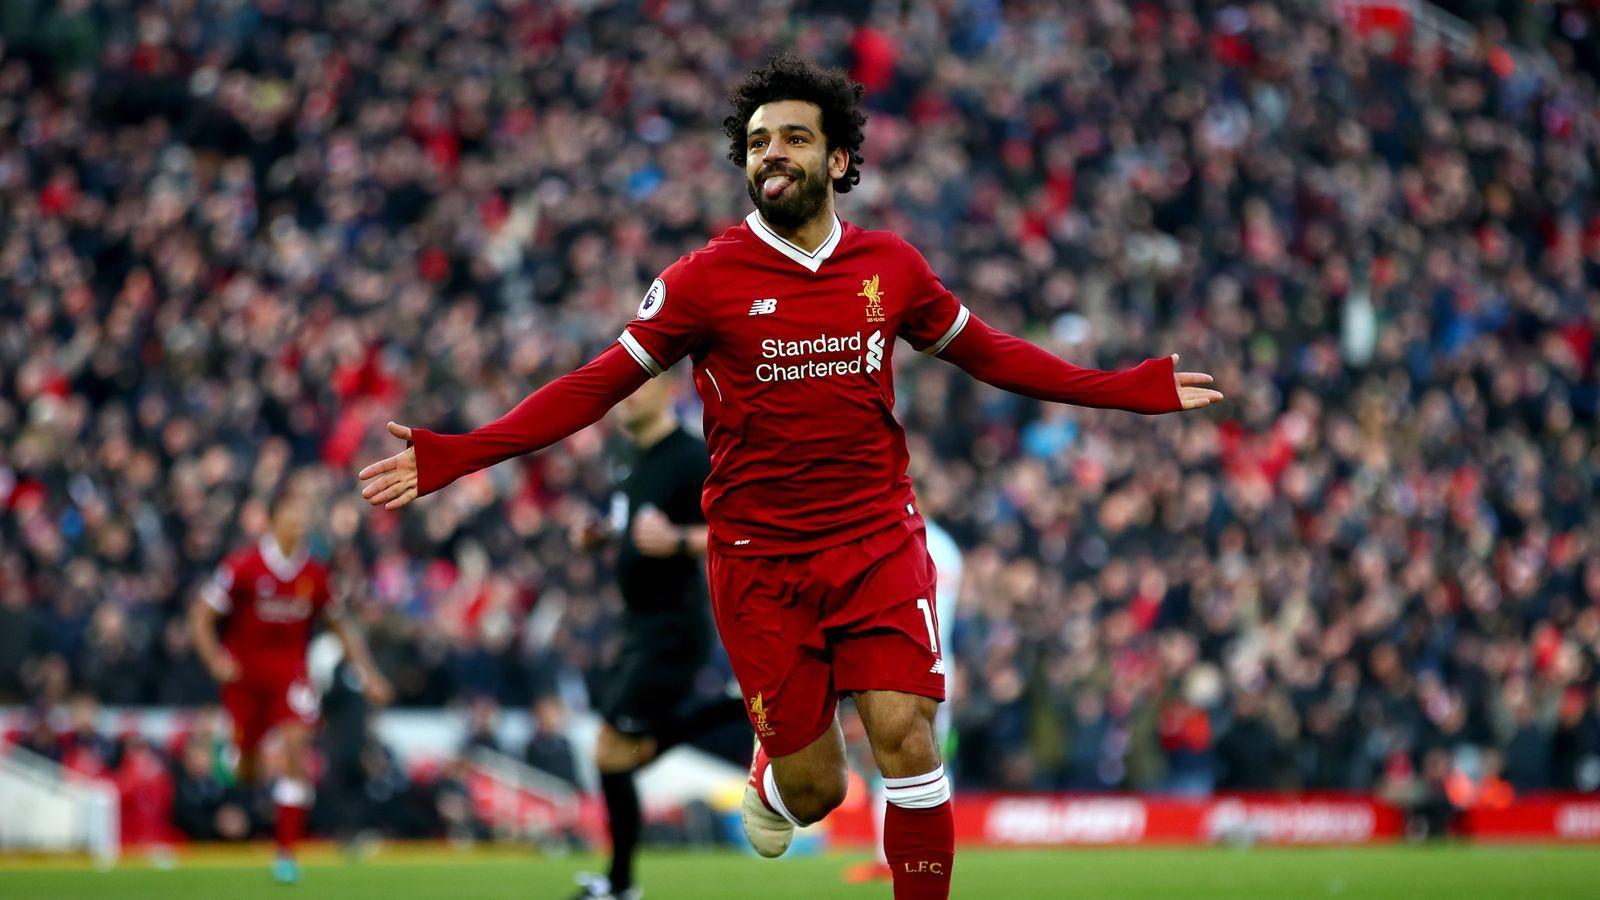 Liverpool's Mohamed Salah Eager To Complete Top Six Clean Sweep